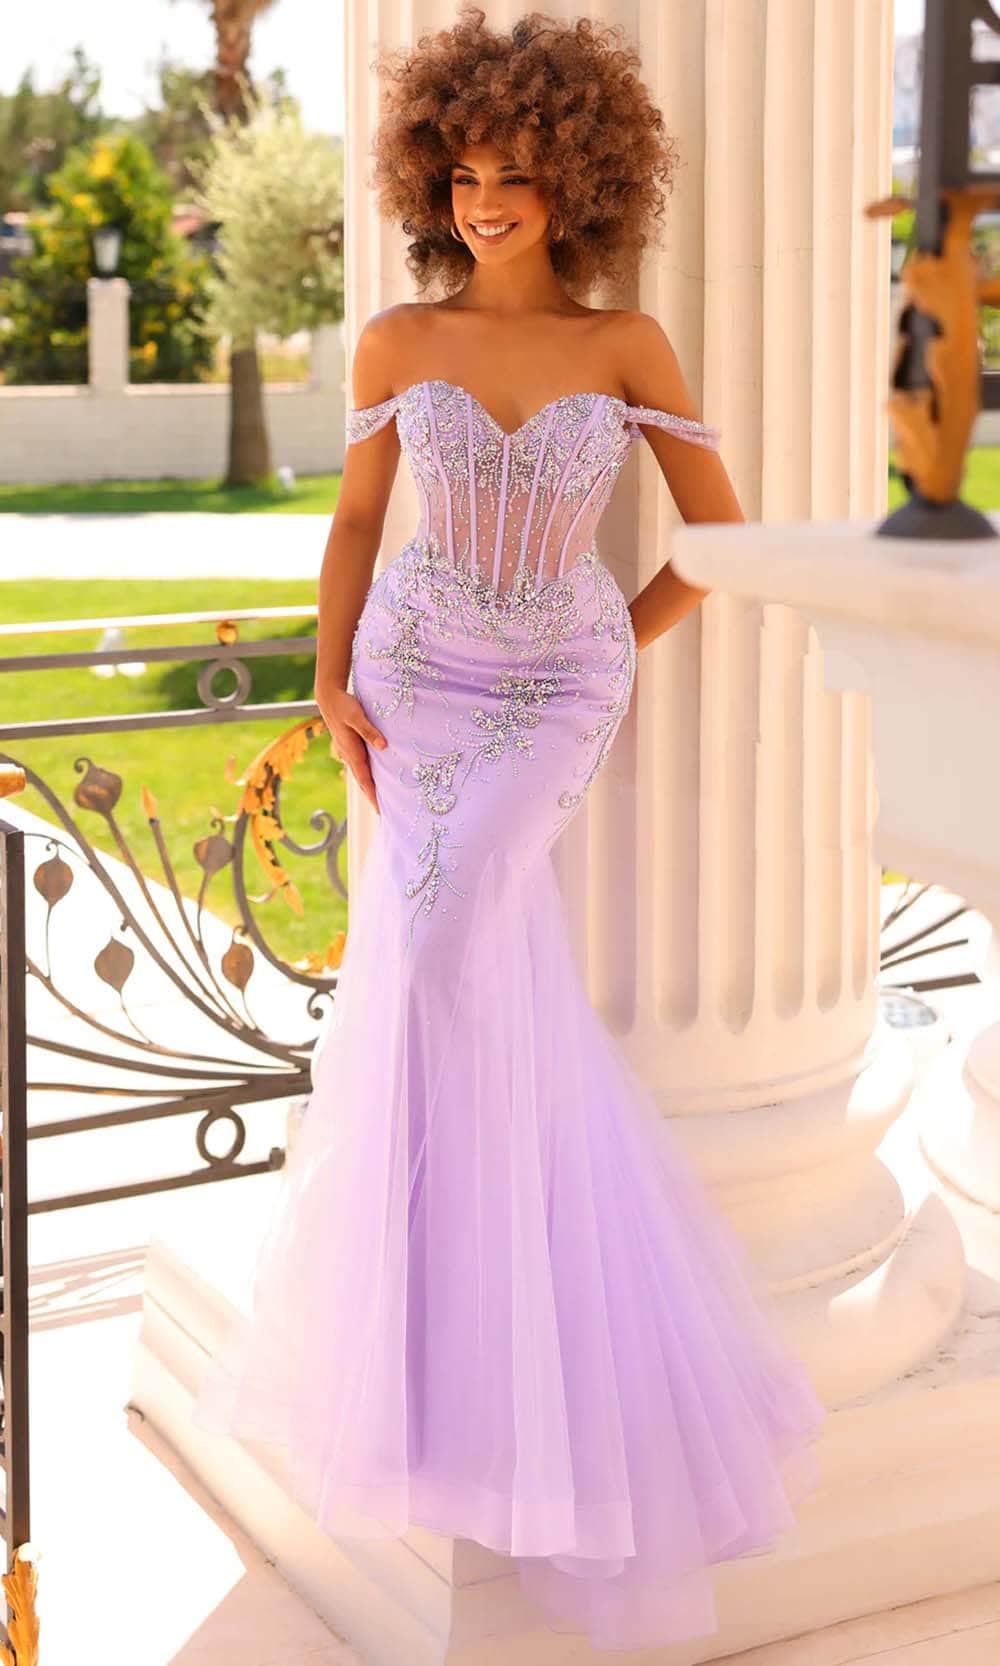 Image of Clarisse 811020 - Beaded Sweetheart Godets Prom Gown